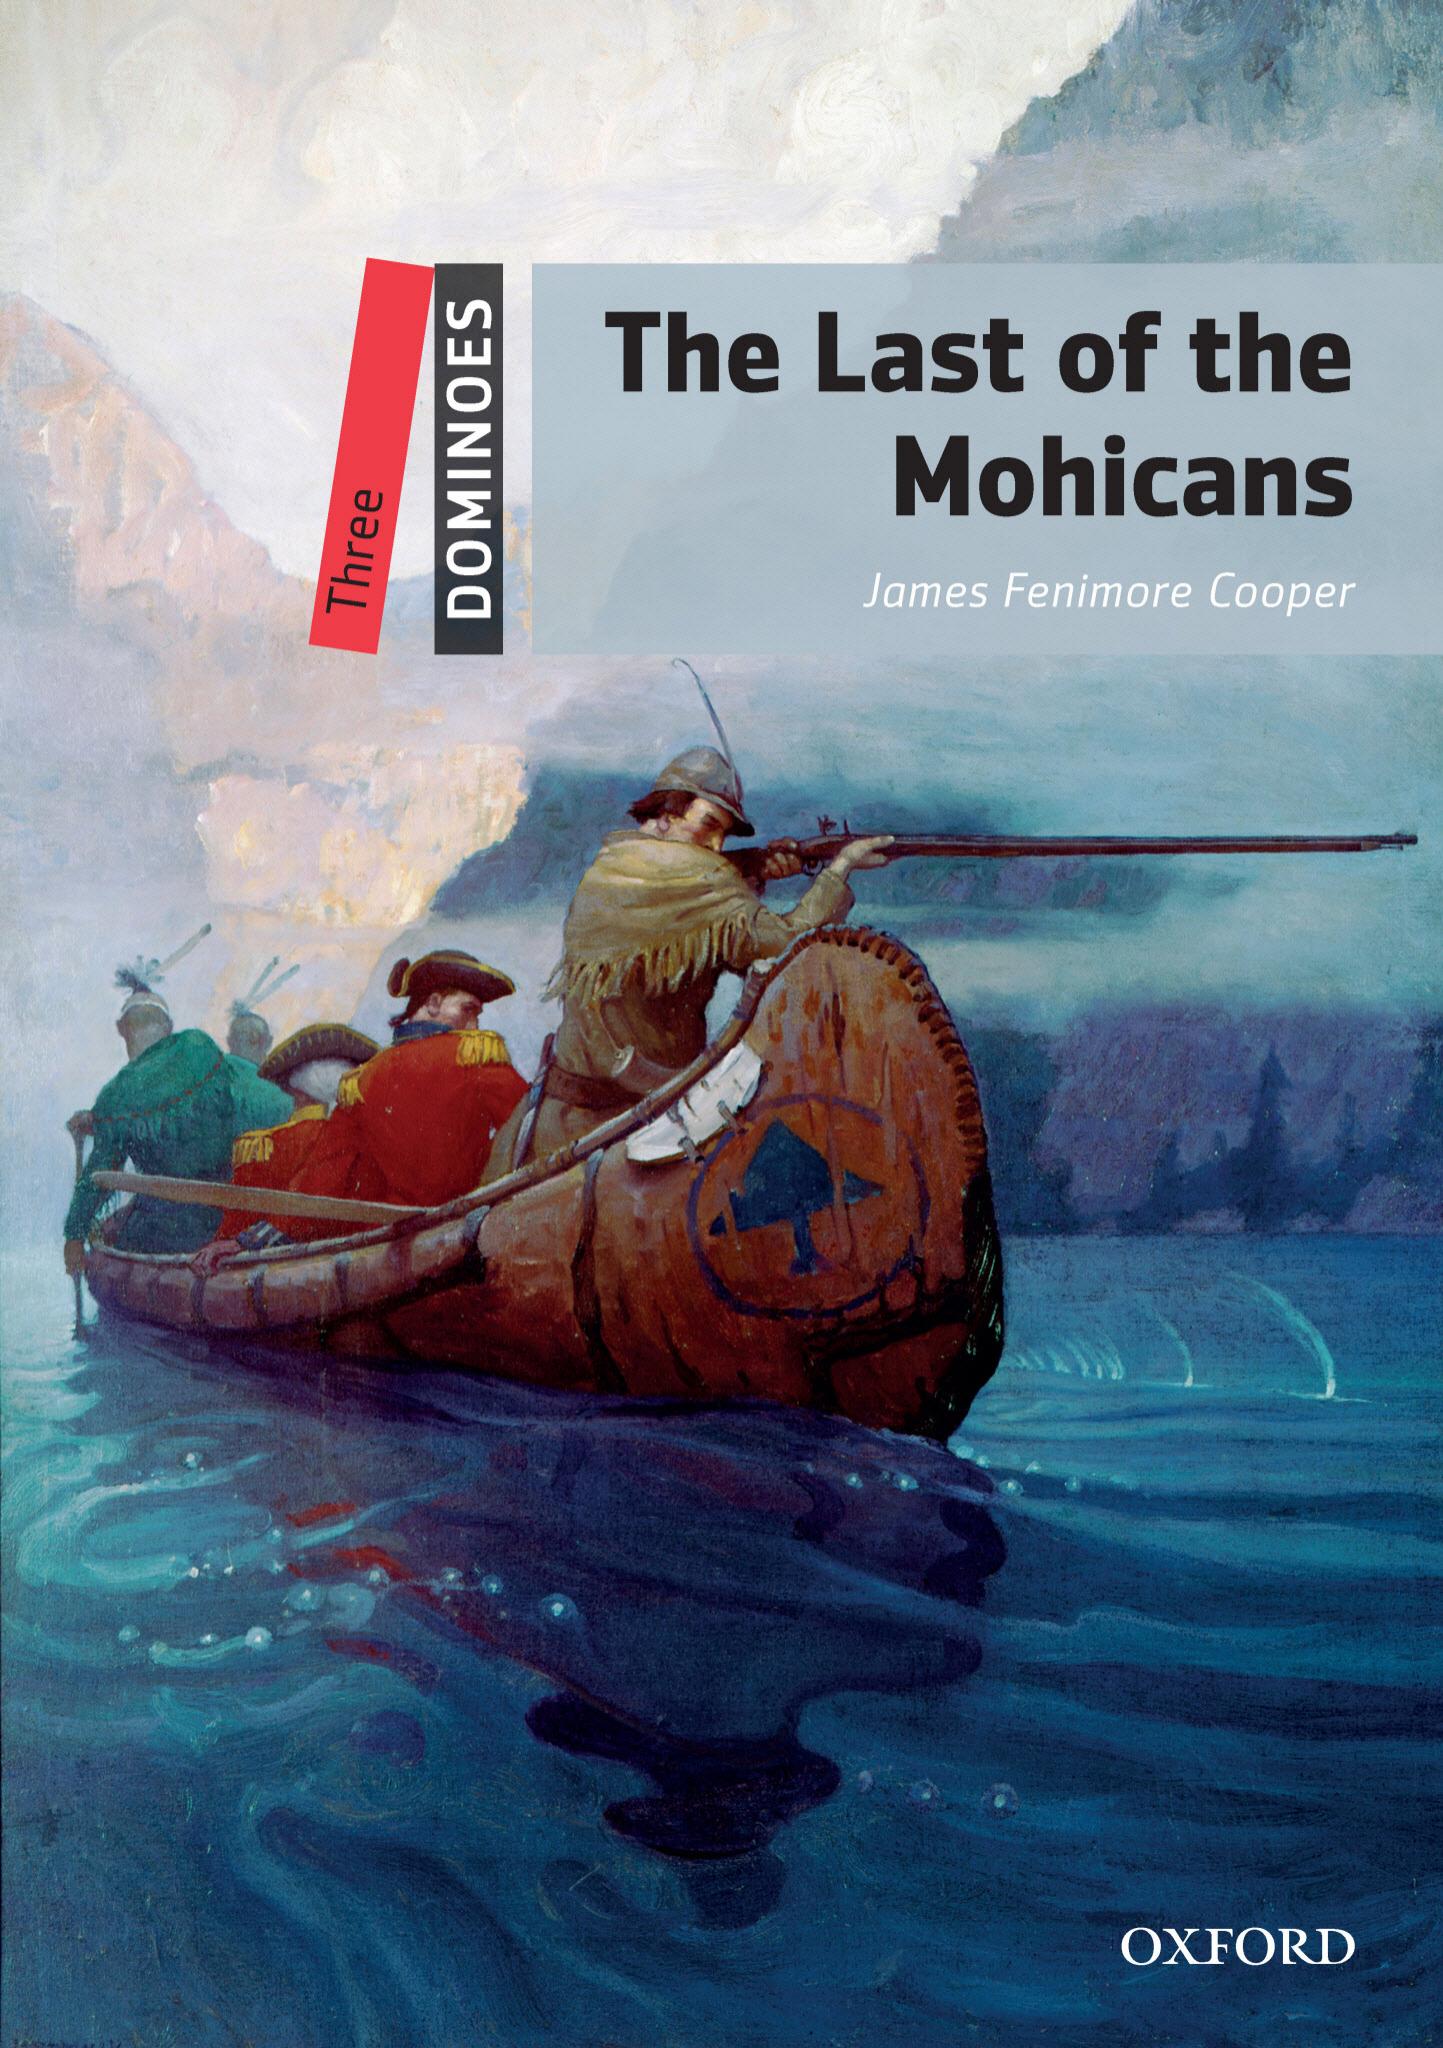 The Last of the Mohicans by Unknown